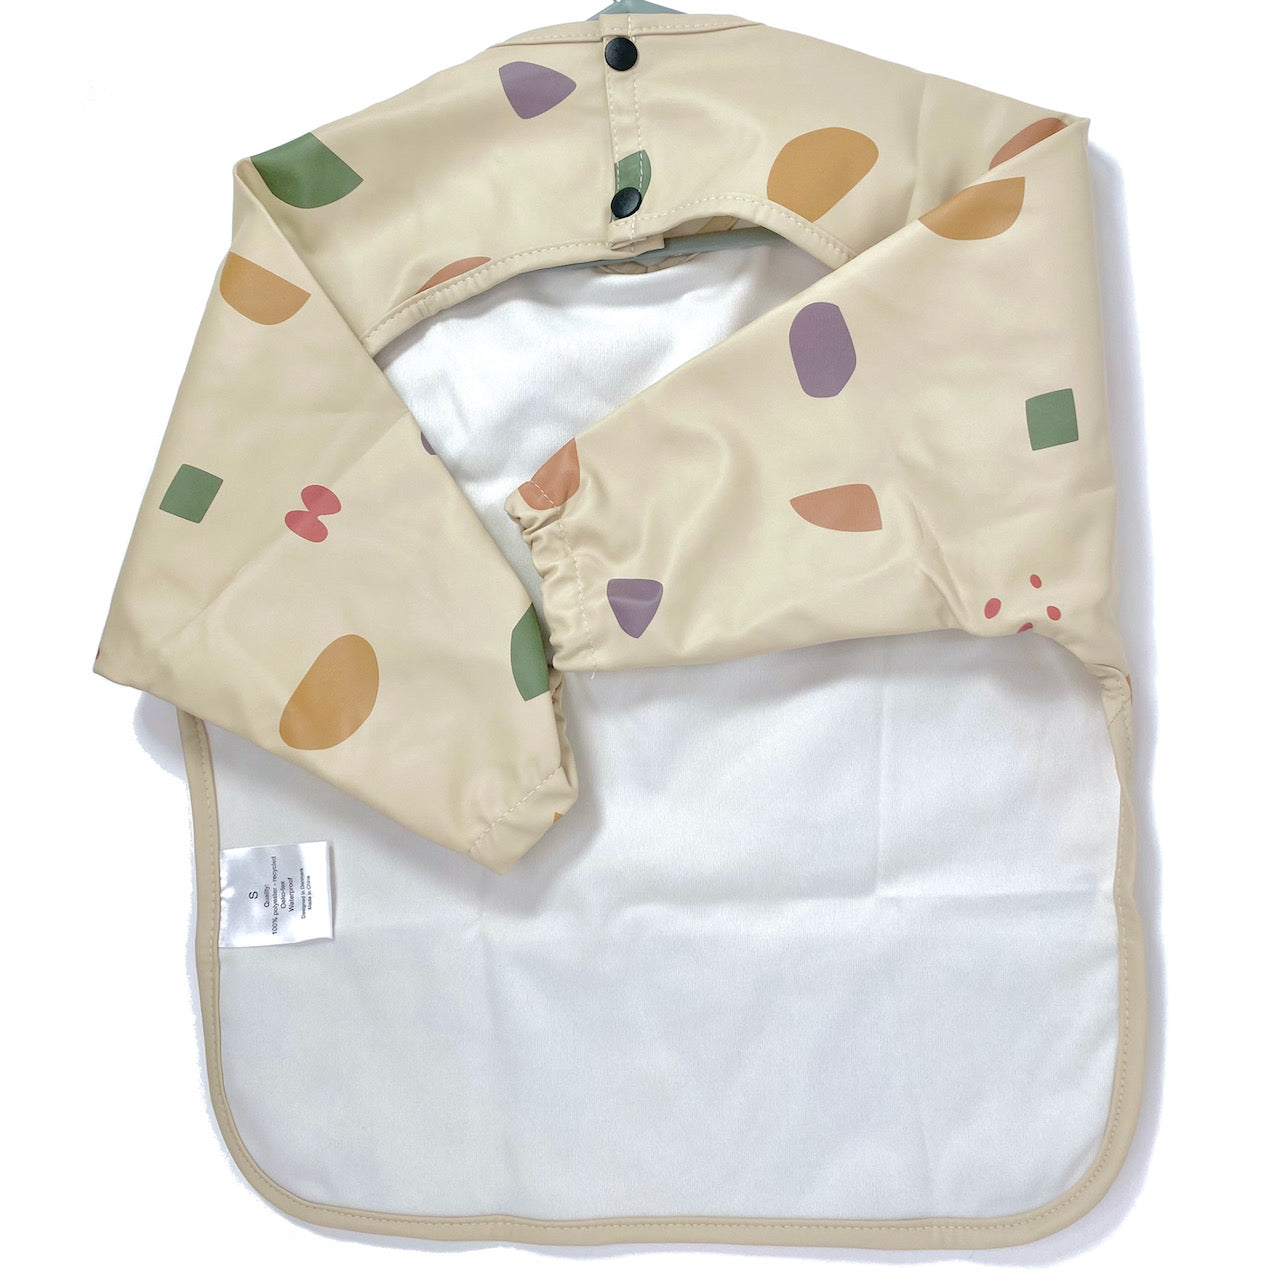 Long-sleeve kids apron in a beige and multicolour design, showing back view.